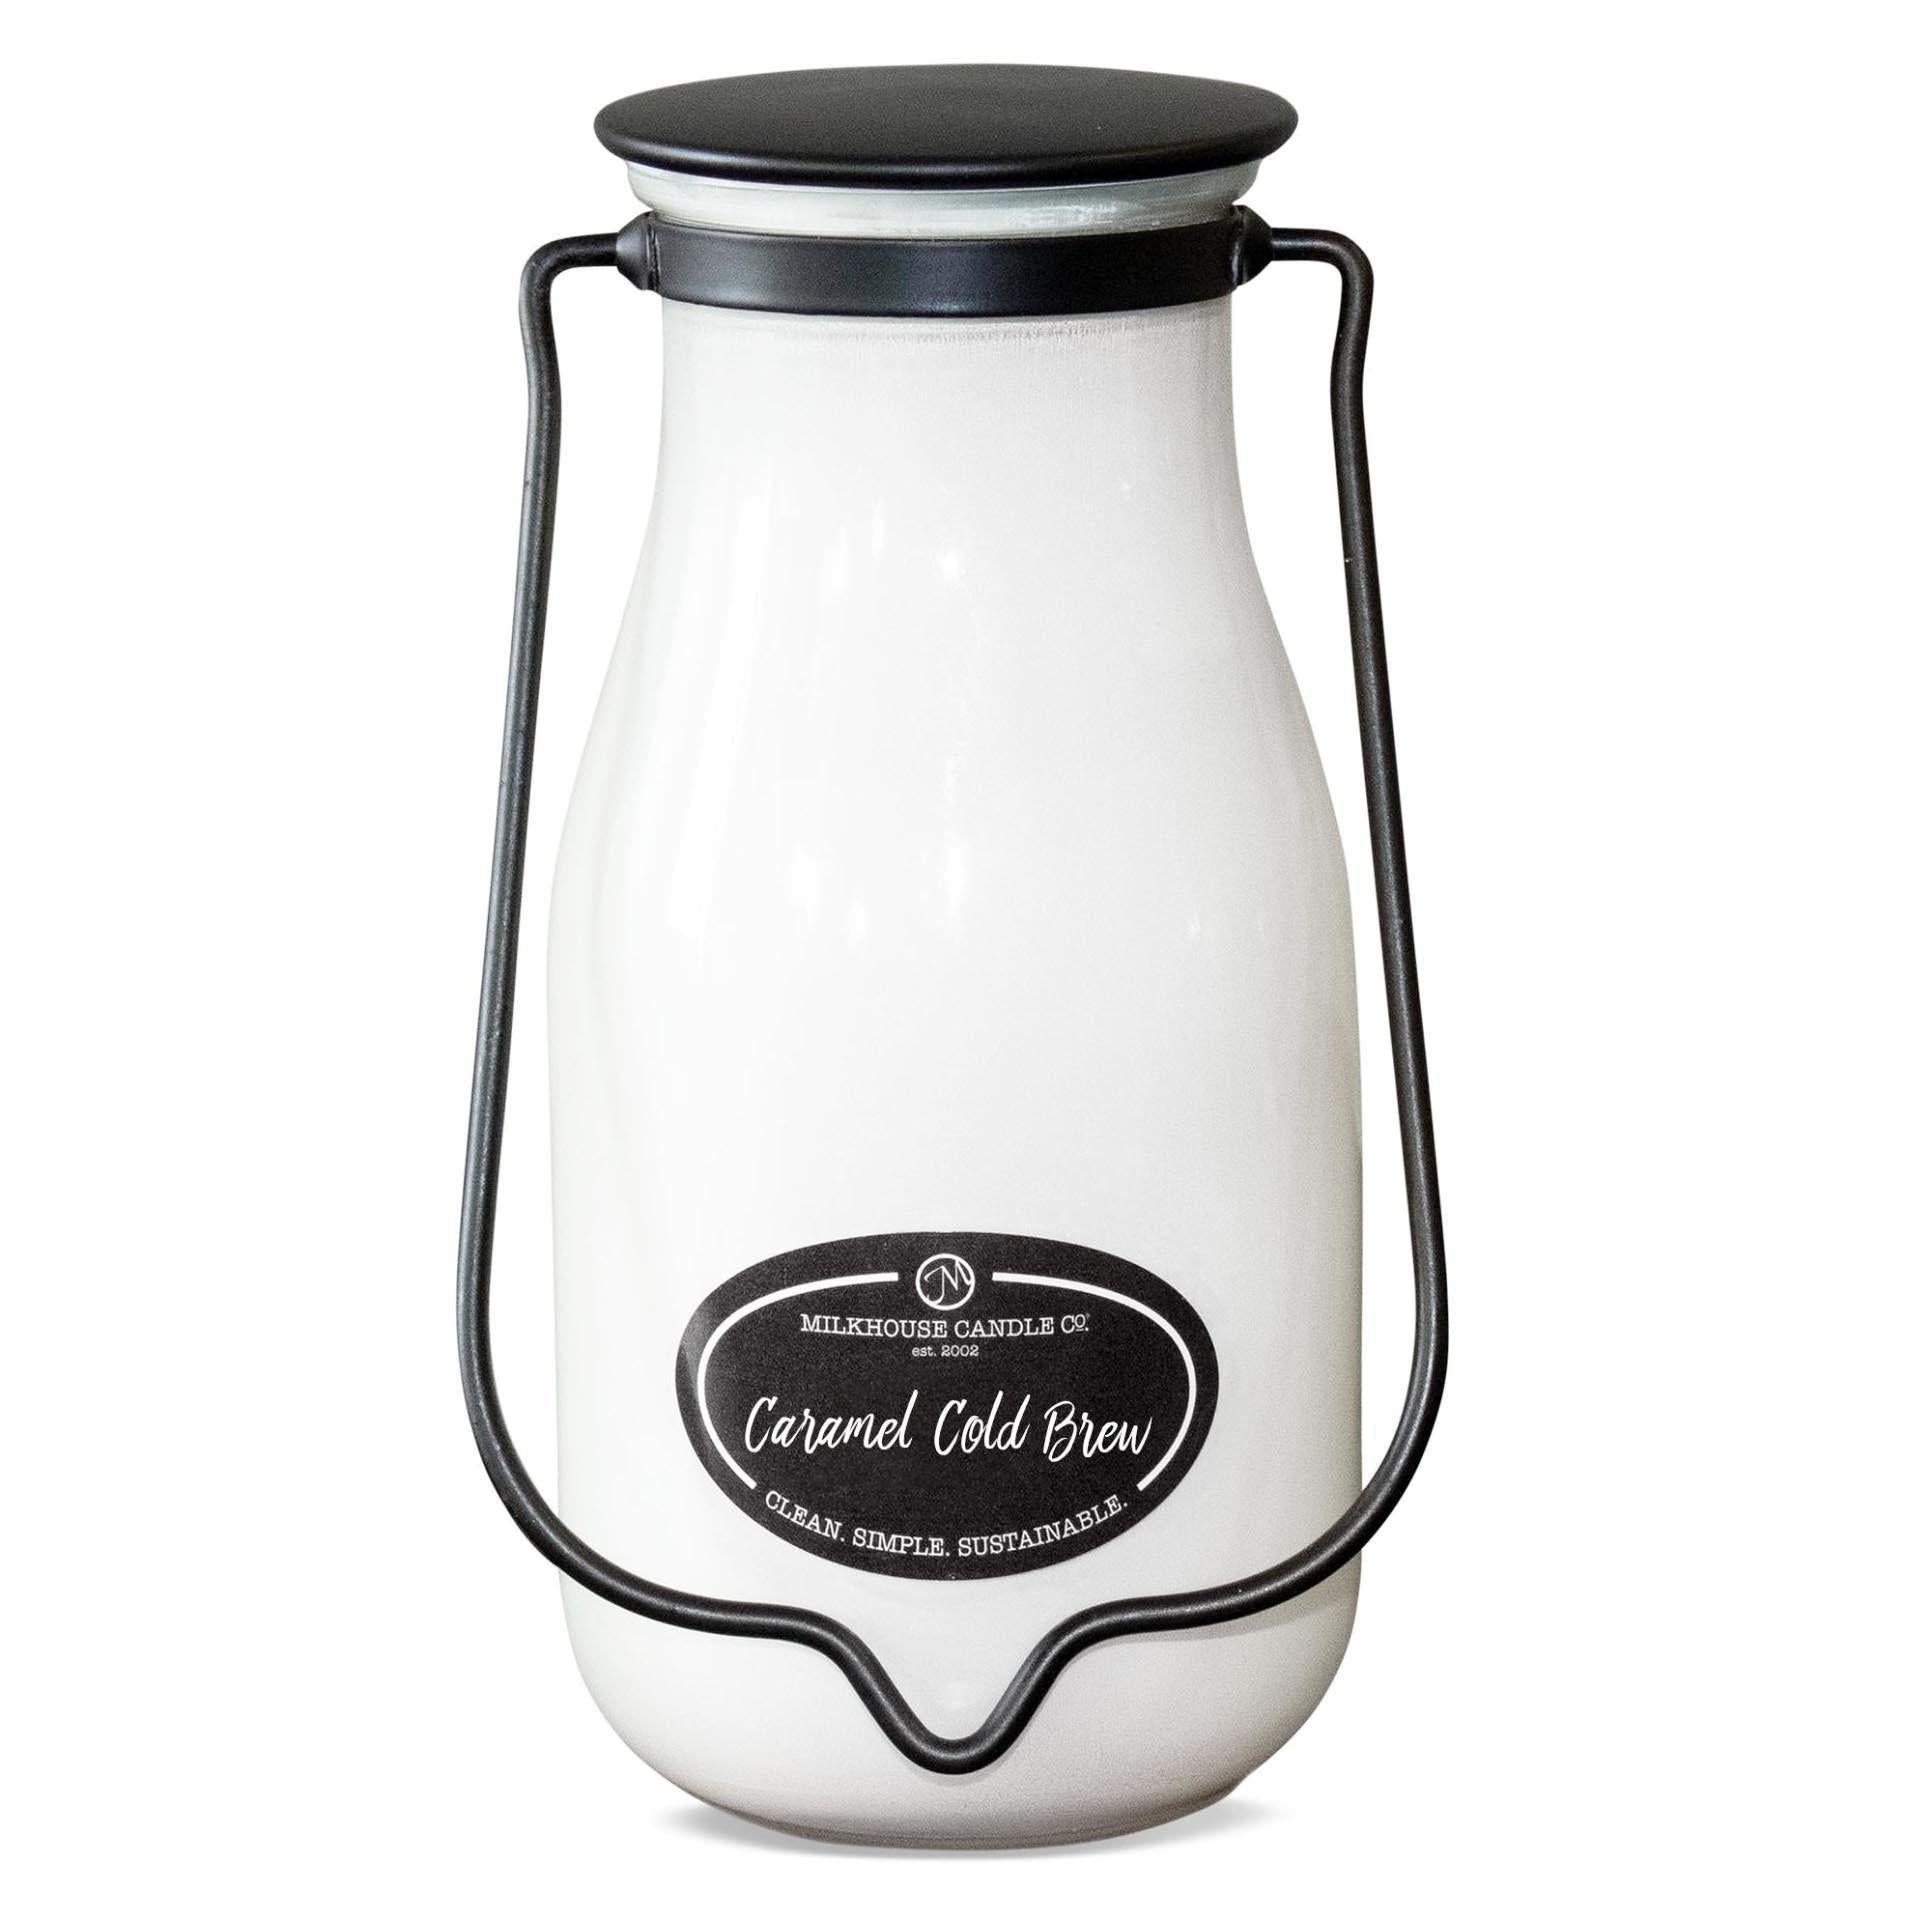 Caramel Cold Brew Butter Jar Candle: Milkhouse Candle Co.